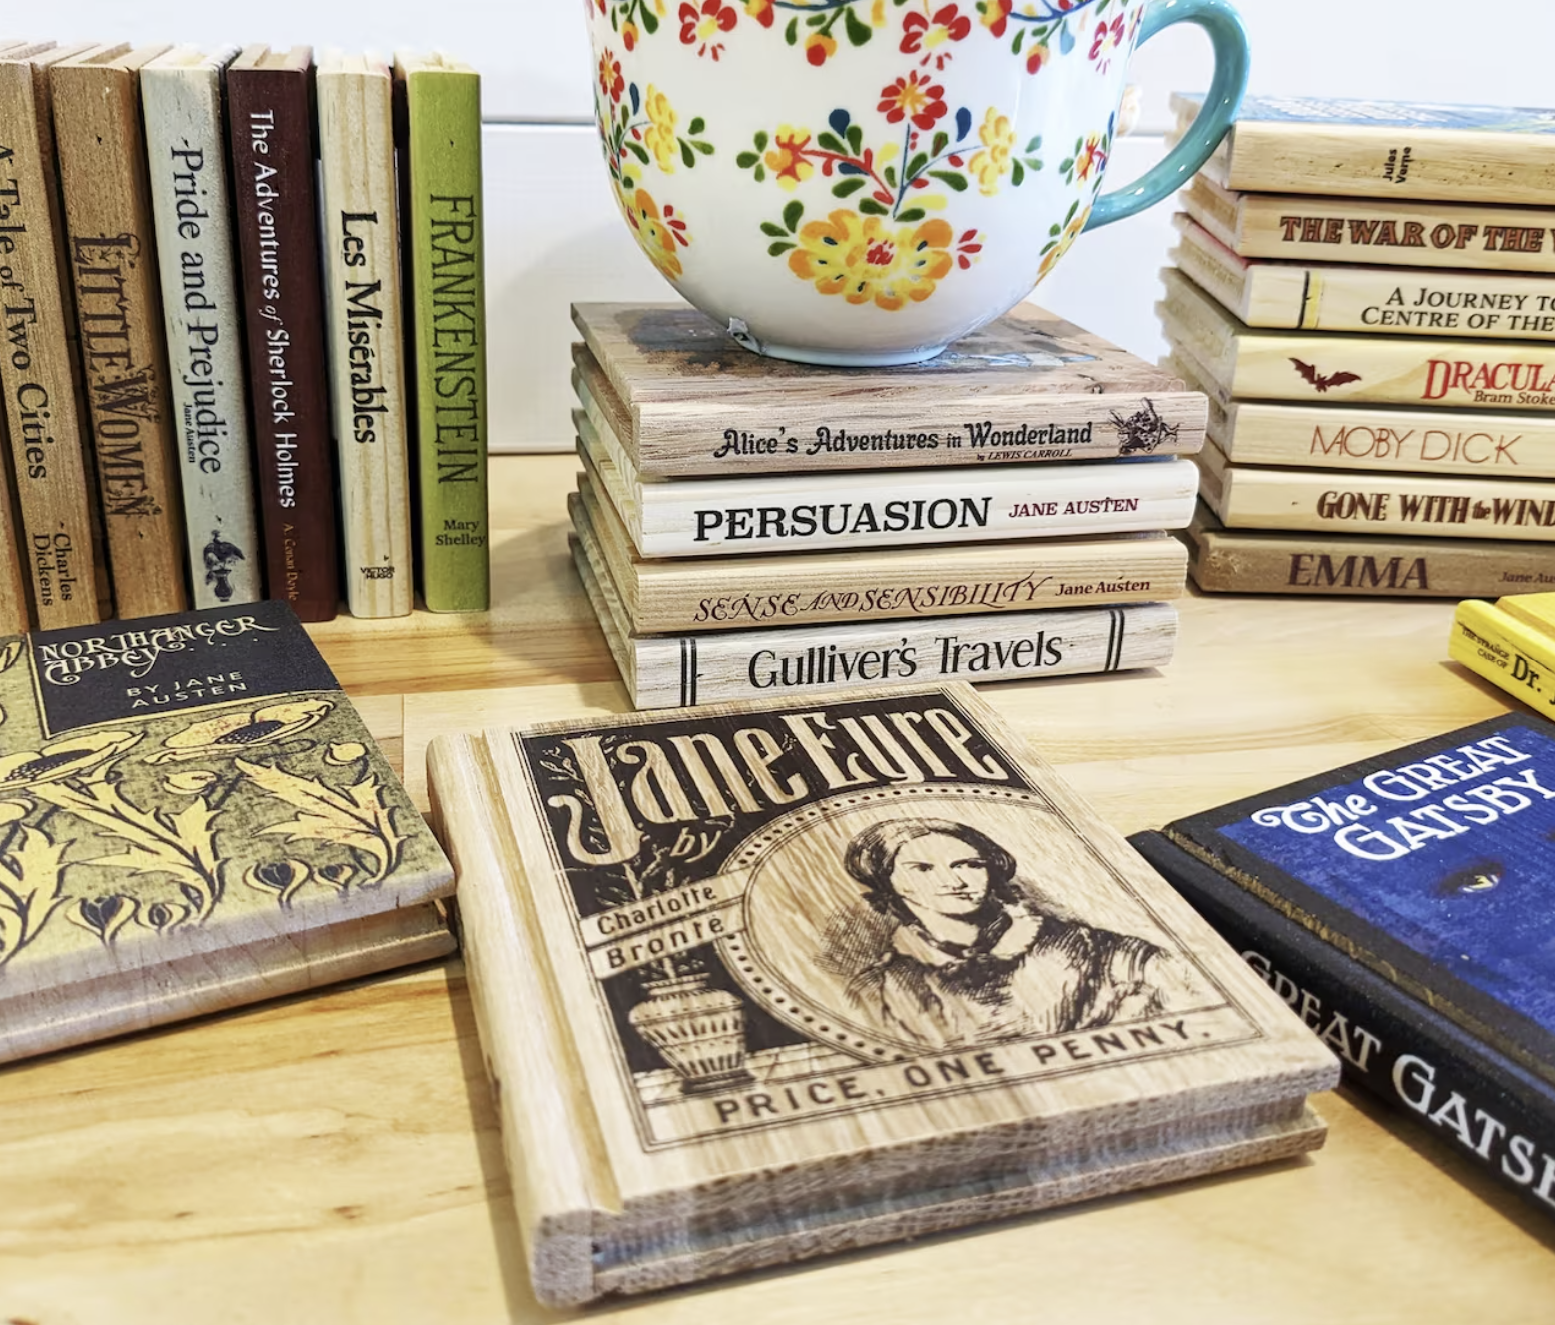 Wooden Coasters carved and printed to look like book covers such as Jane Eyre.